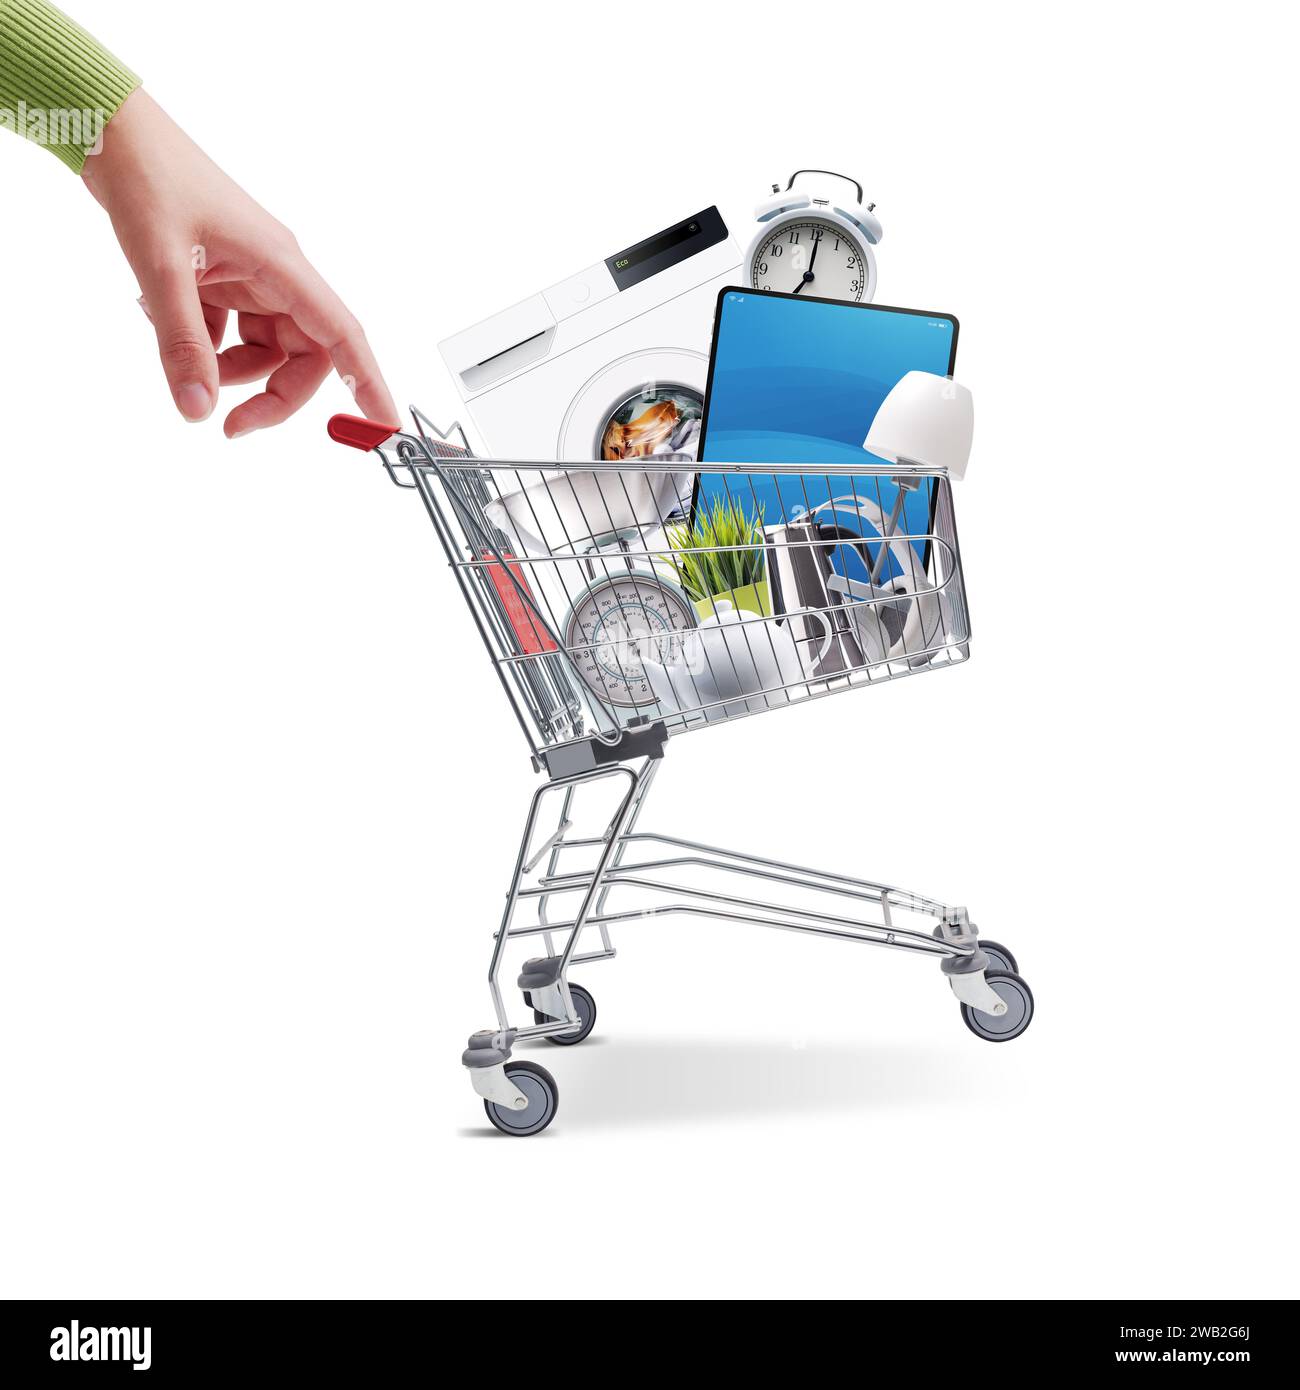 Woman pushing a small shopping cart full of household goods, appliances and electronics Stock Photo